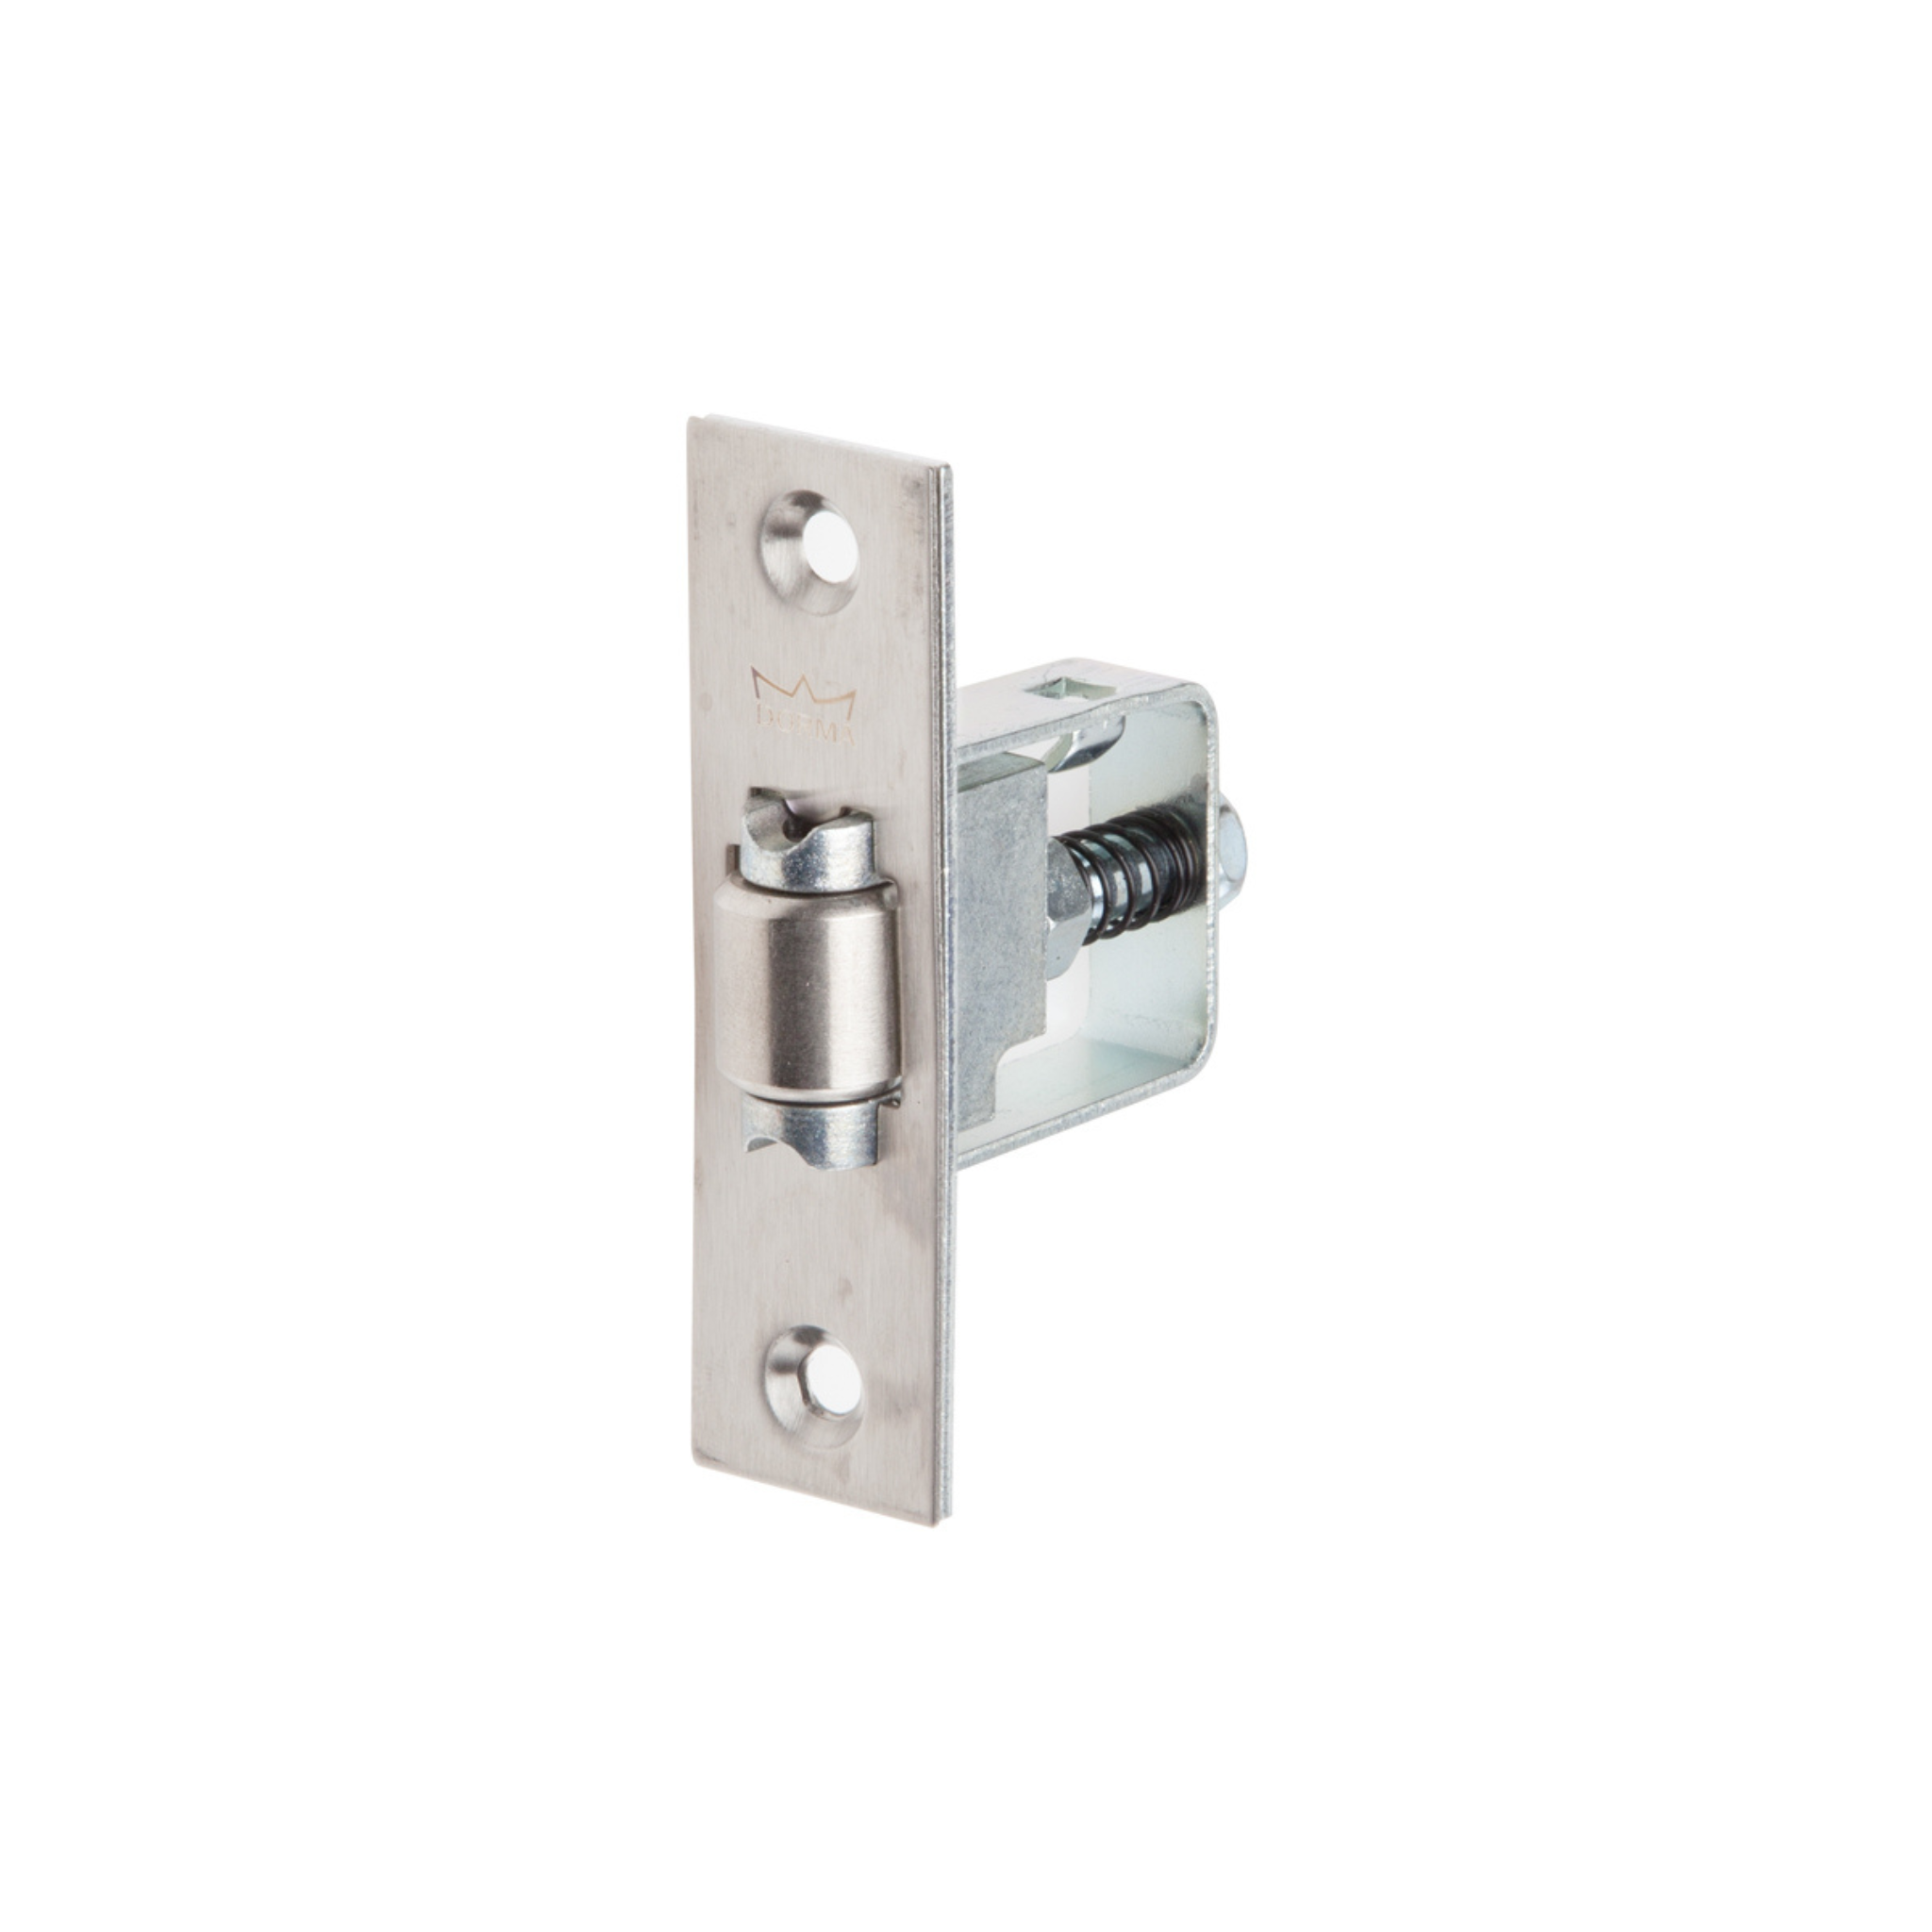 DBC-SS-022, Roller Bolt, 76mm (l) x 40mm (w) x 20mm (t), Stainless Steel, DORMAKABA